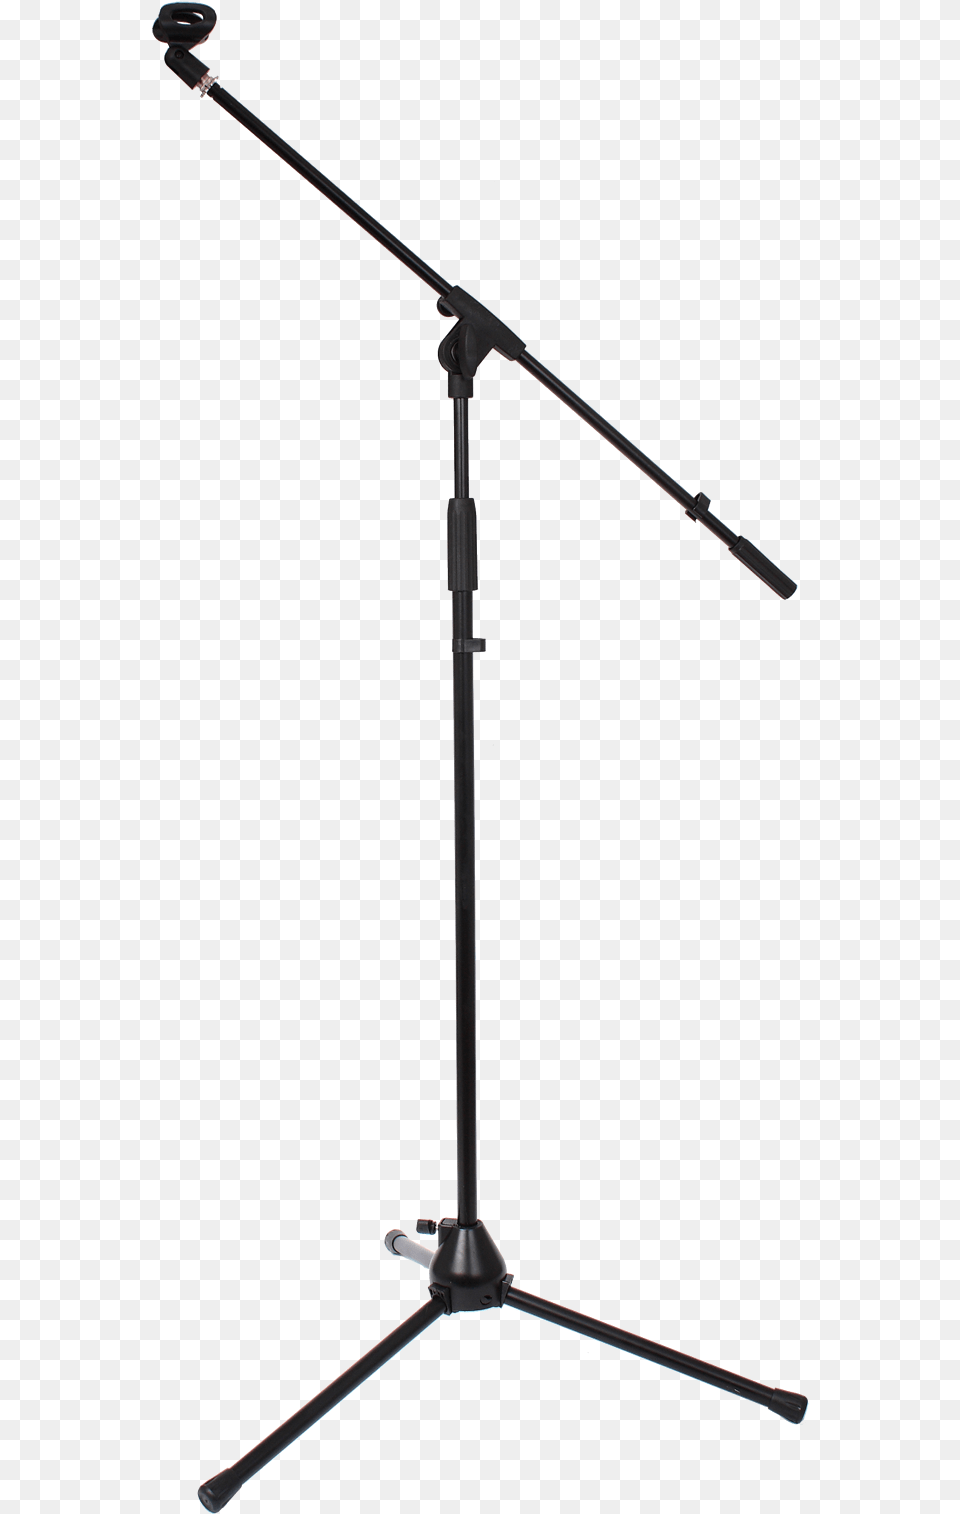 Micro On Stand, Electrical Device, Microphone, Tripod, Furniture Png Image